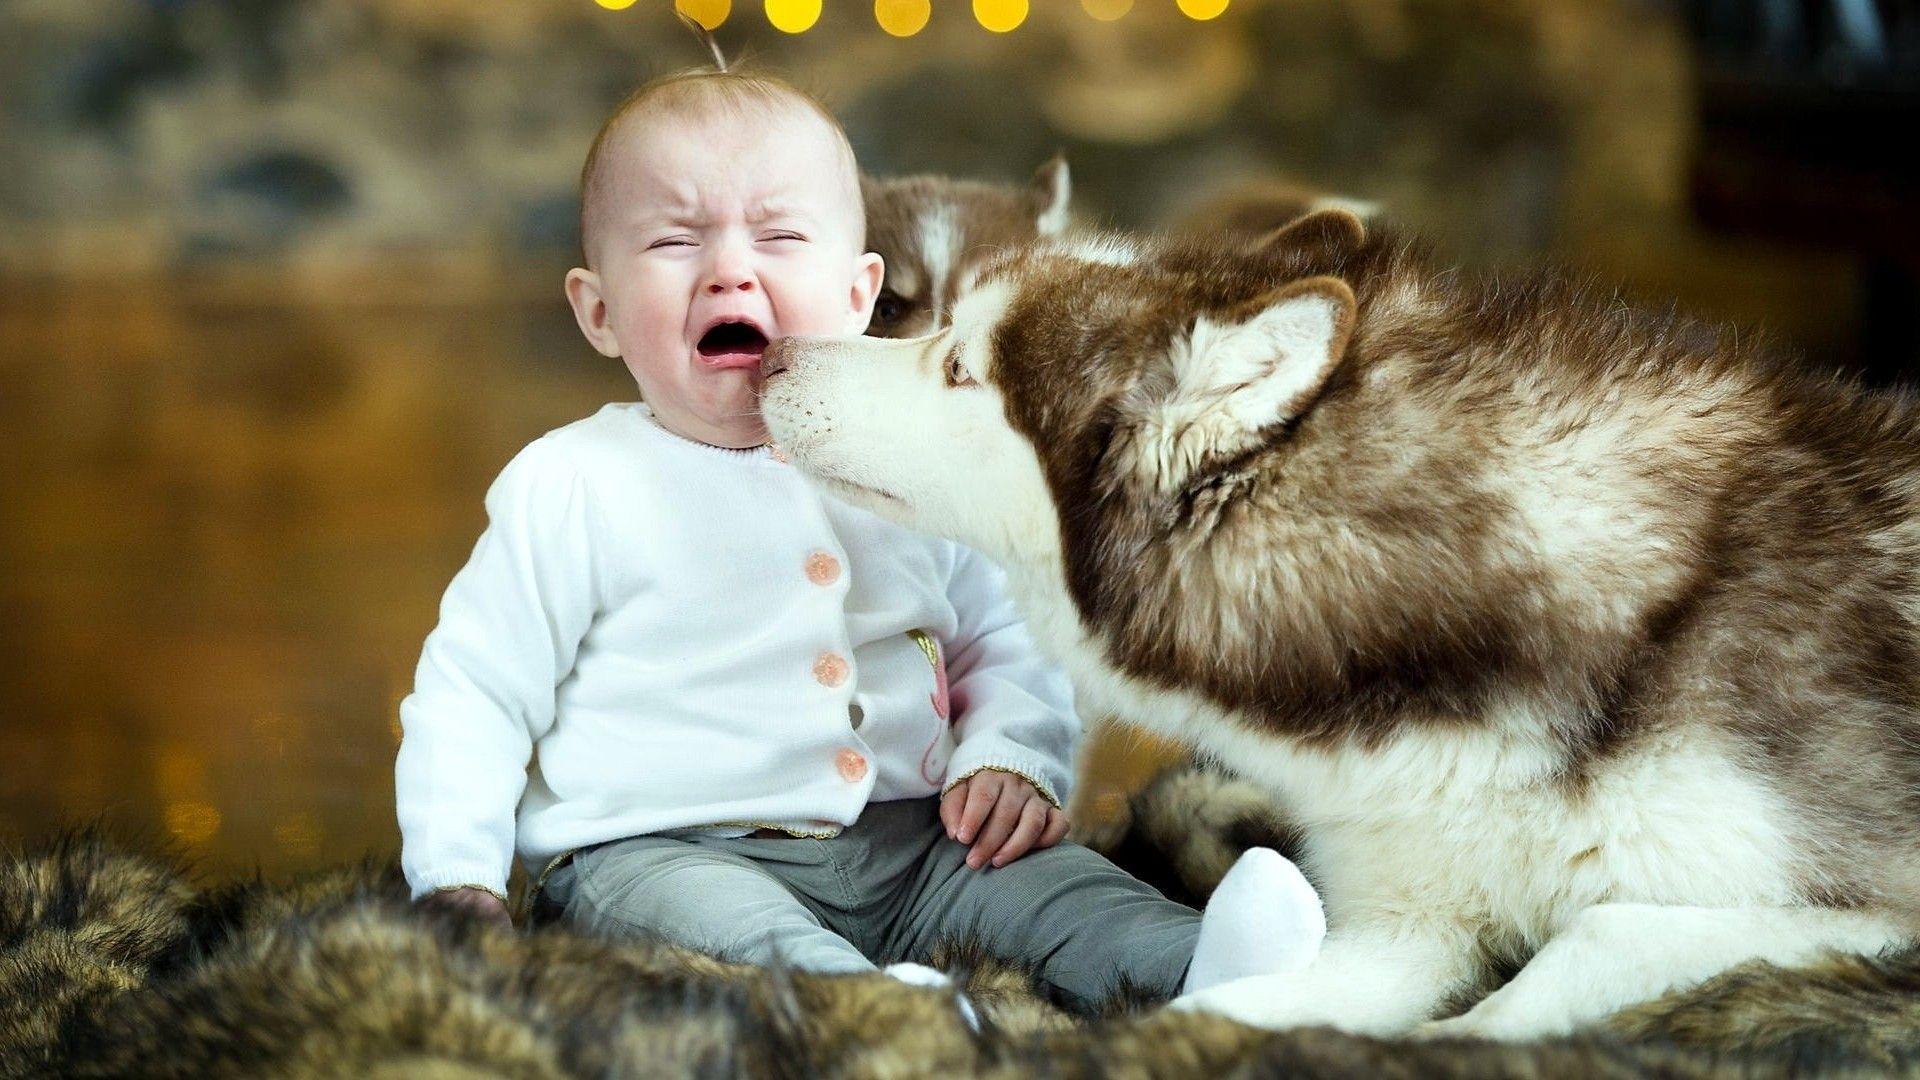 Cute Crying Baby With Dog Wallpaper. Baby dogs, Baby